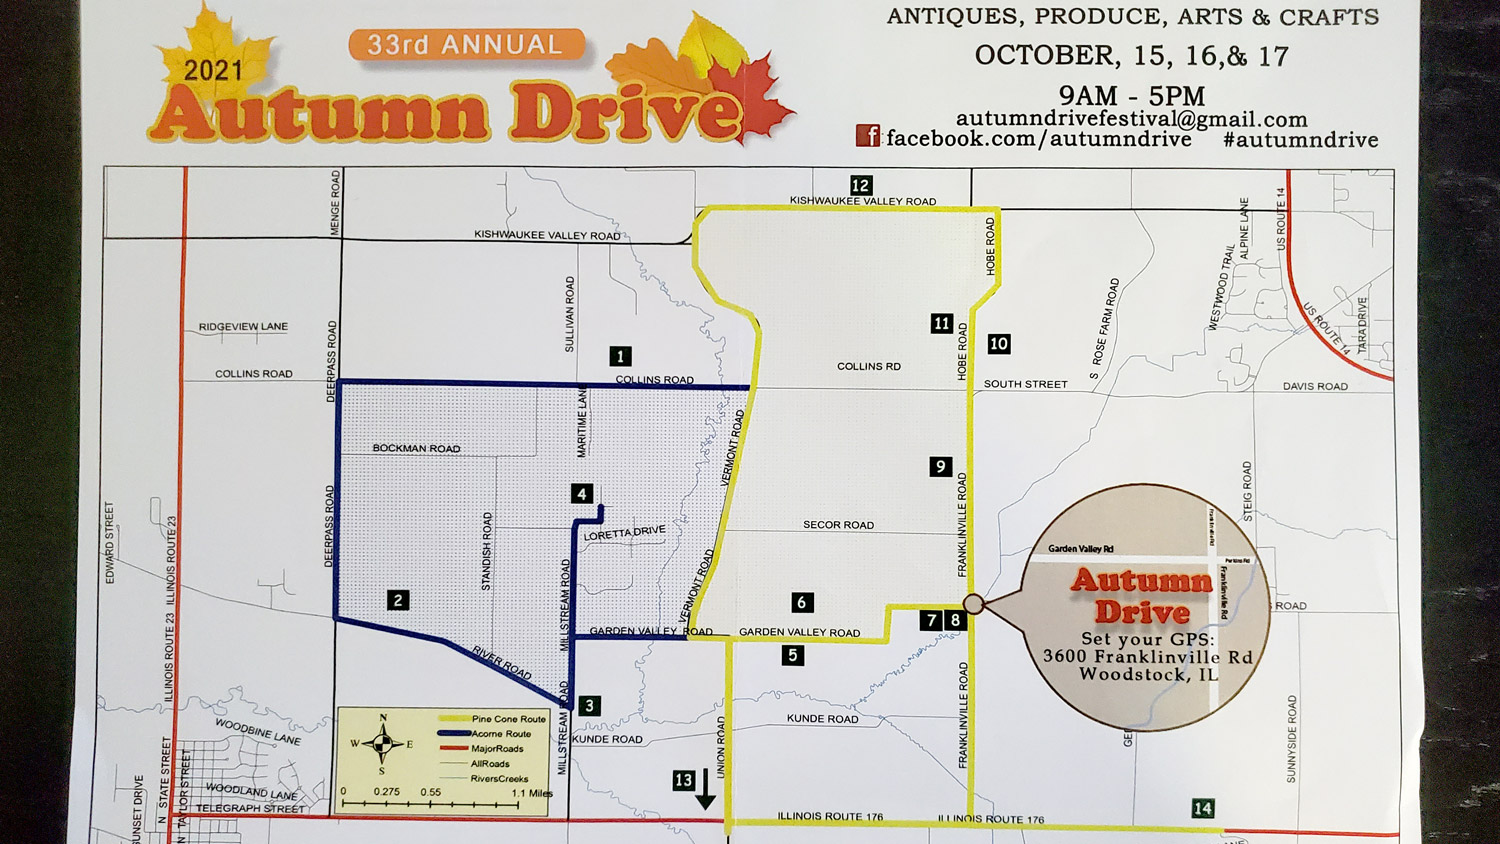 Map to the 33rd Annual Autumn Drive (2021).